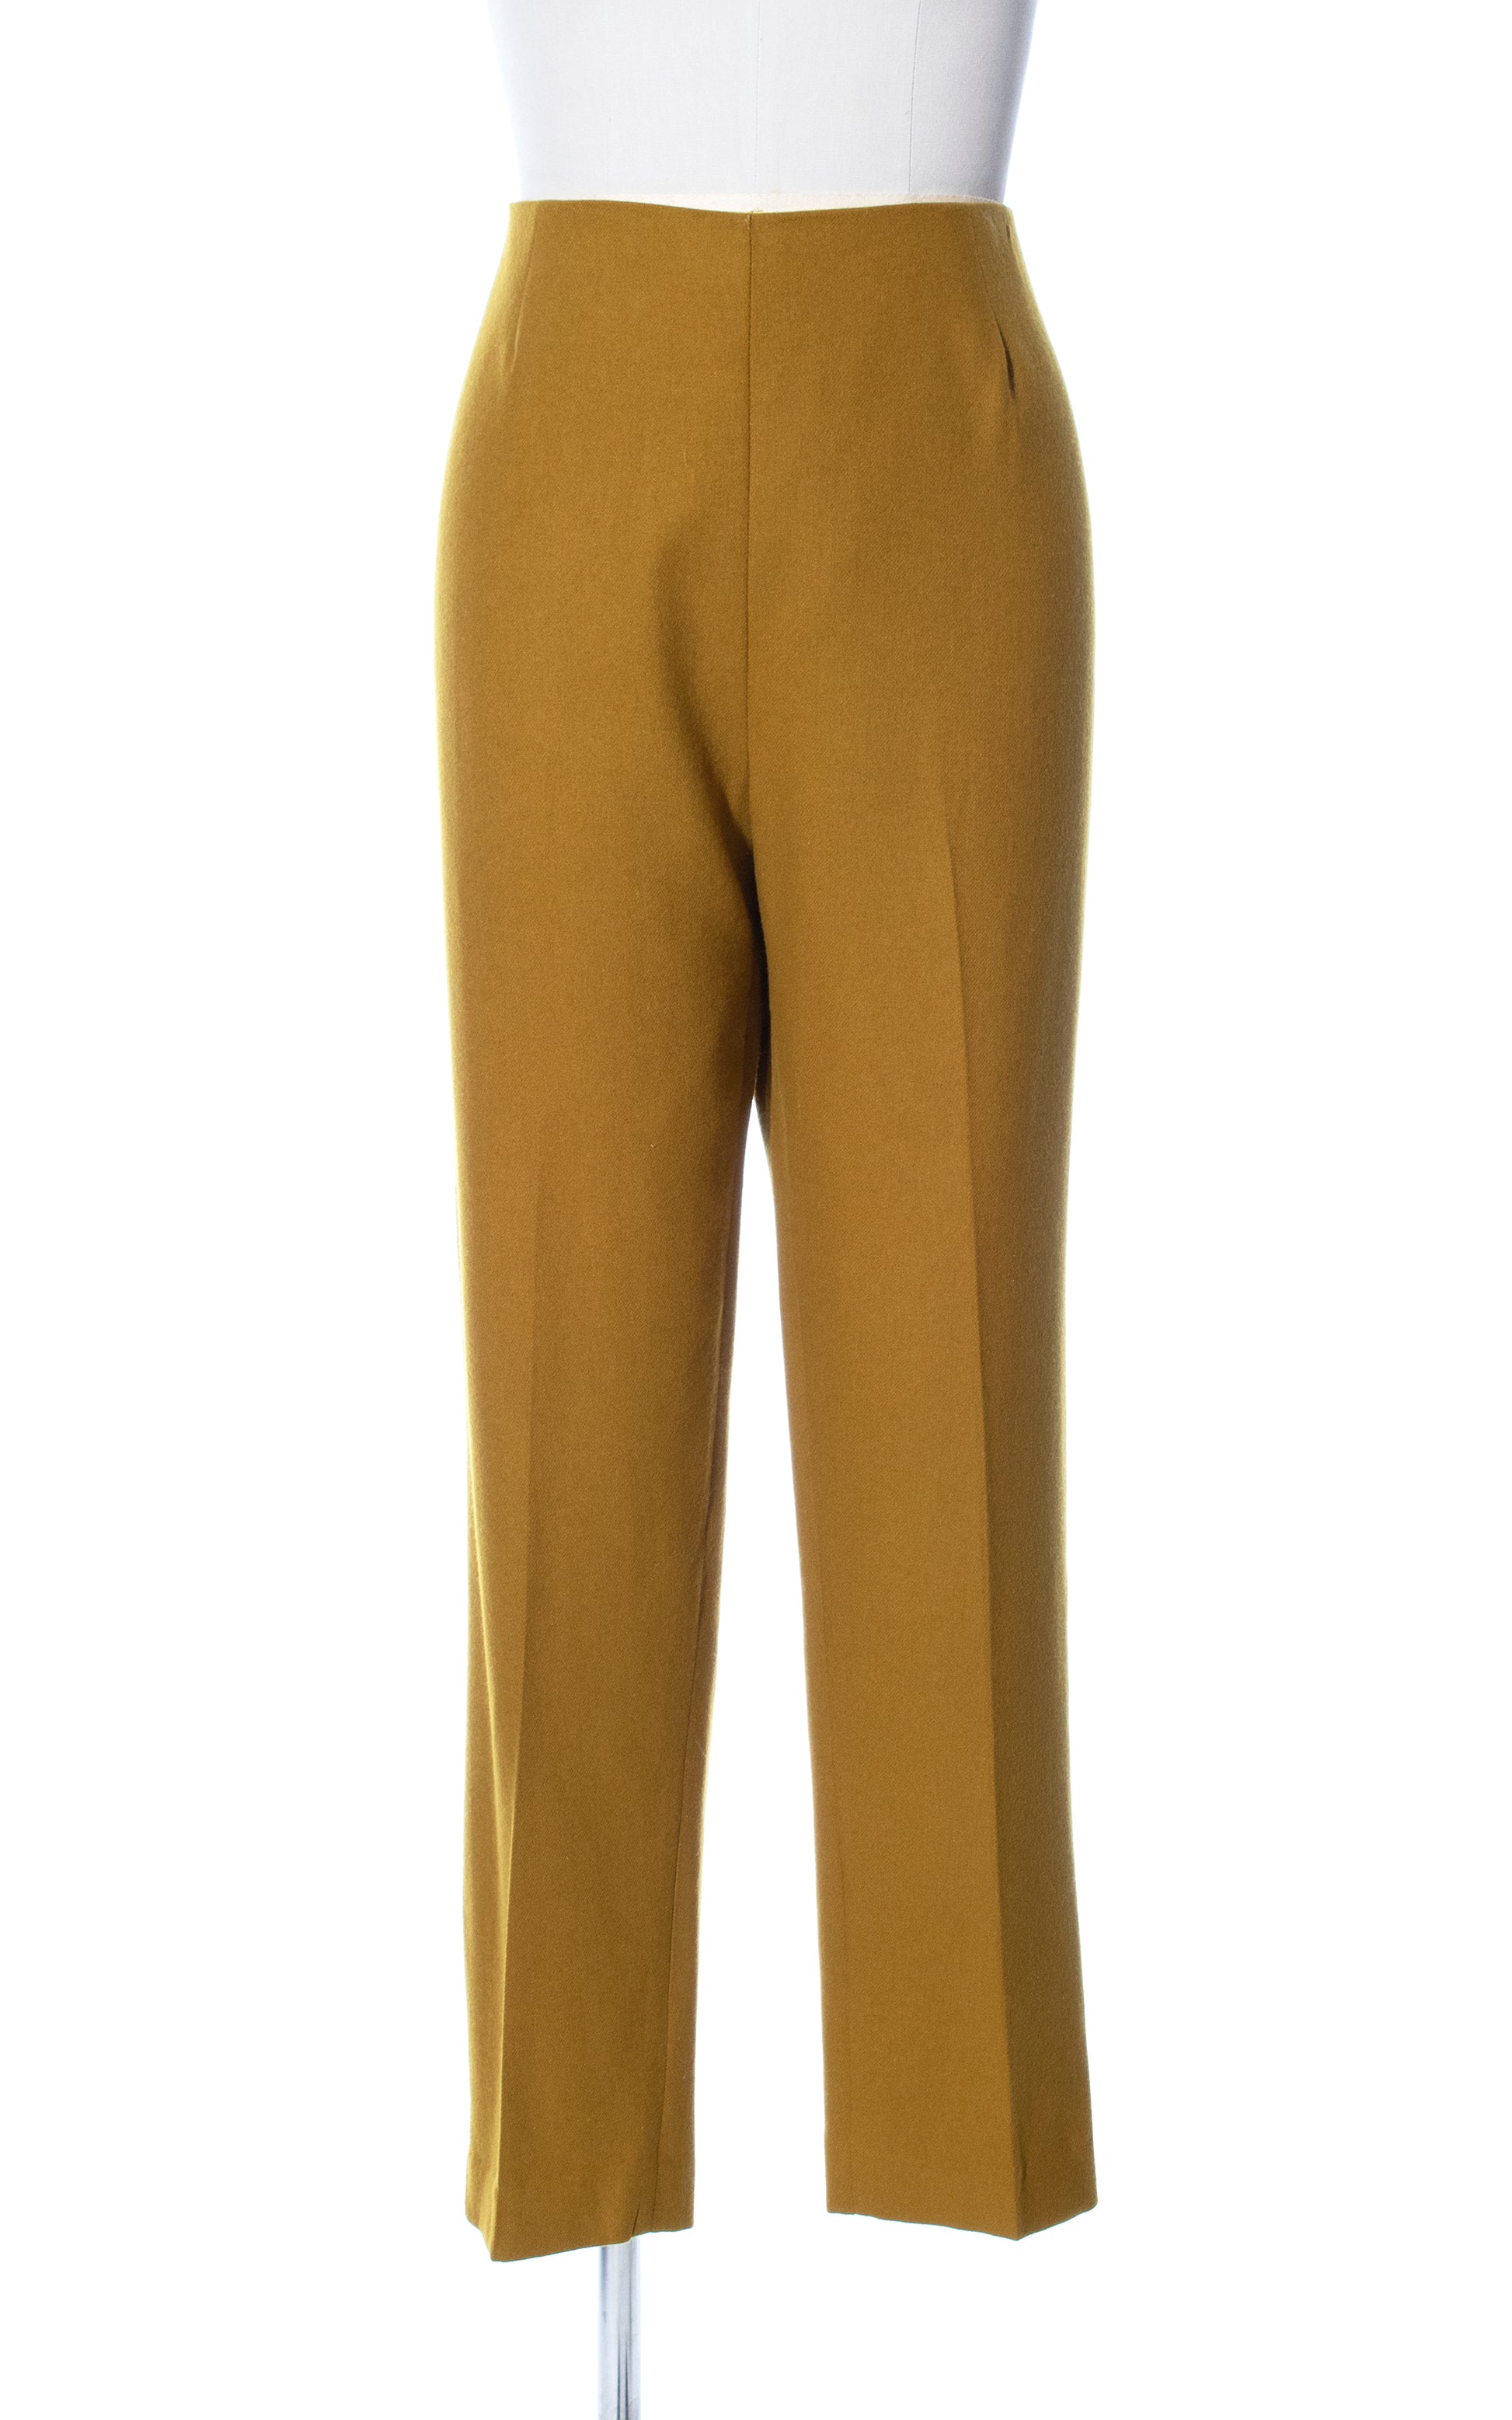 Vintage 60s 1960s Mustard Yellow Wool Twill High Waisted Pants Birthday Life Vintage